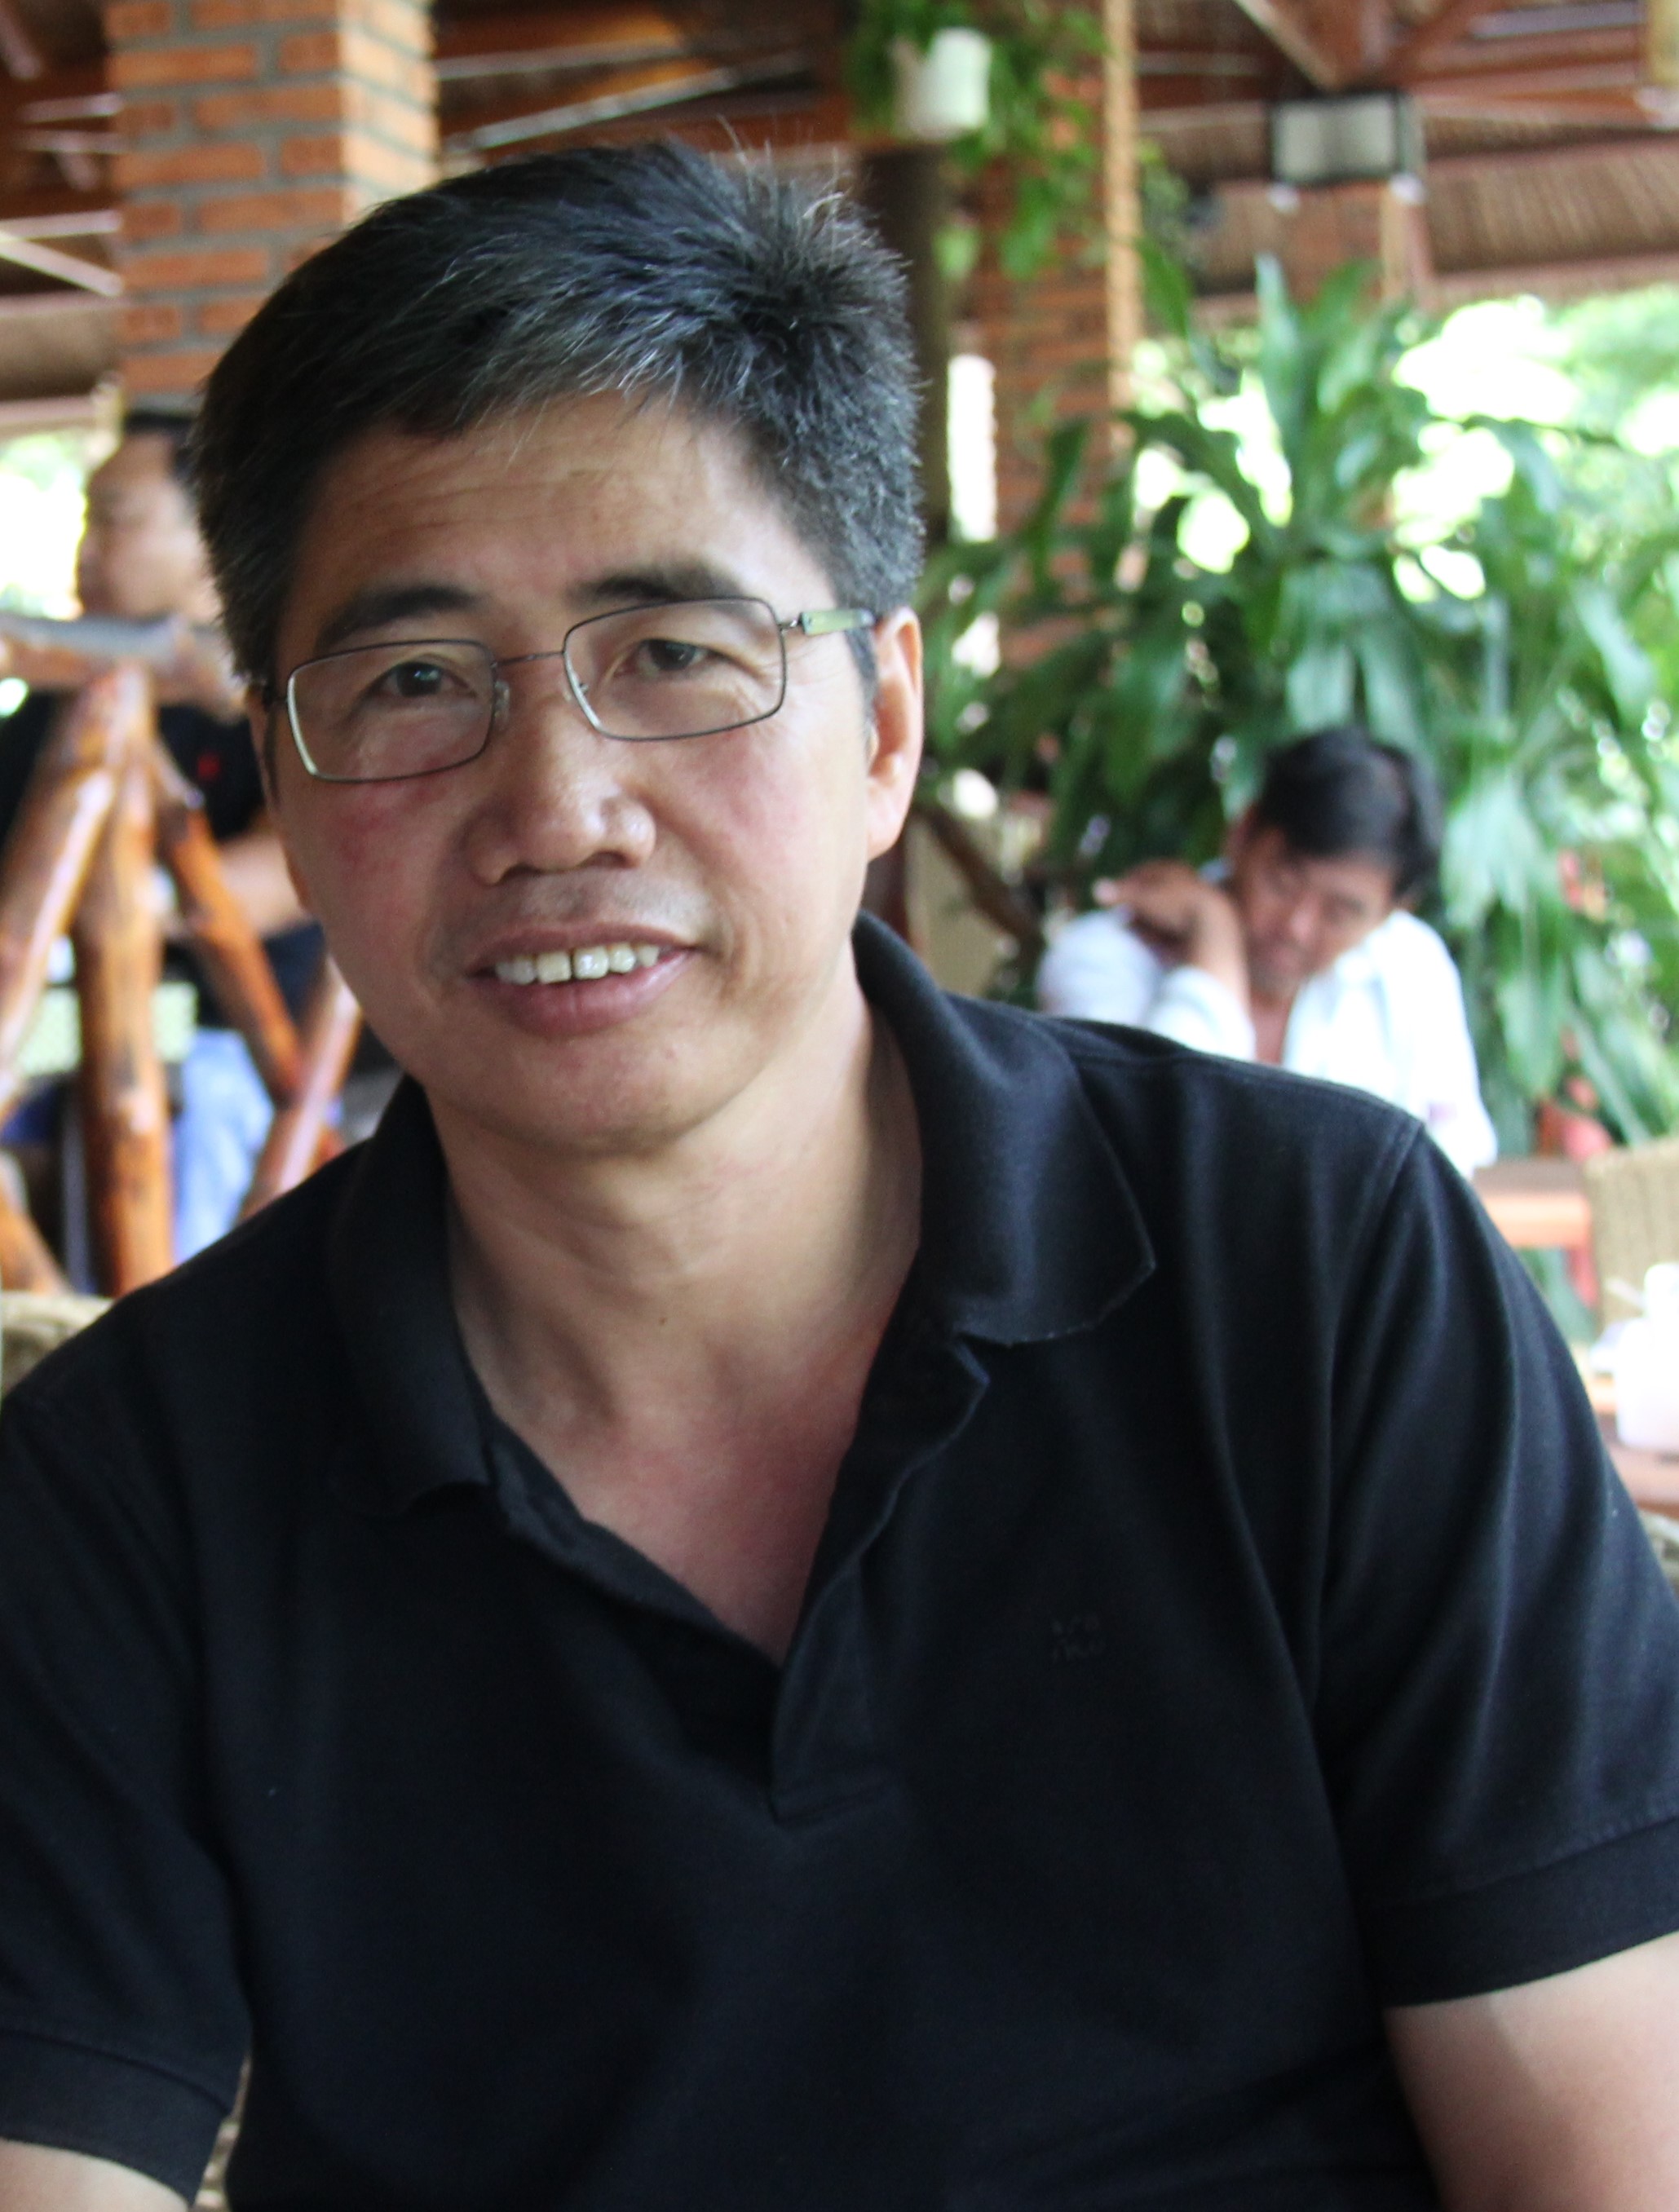 Huy Duc in Ho Chi Minh City, Vietnam, May 27, 2012.